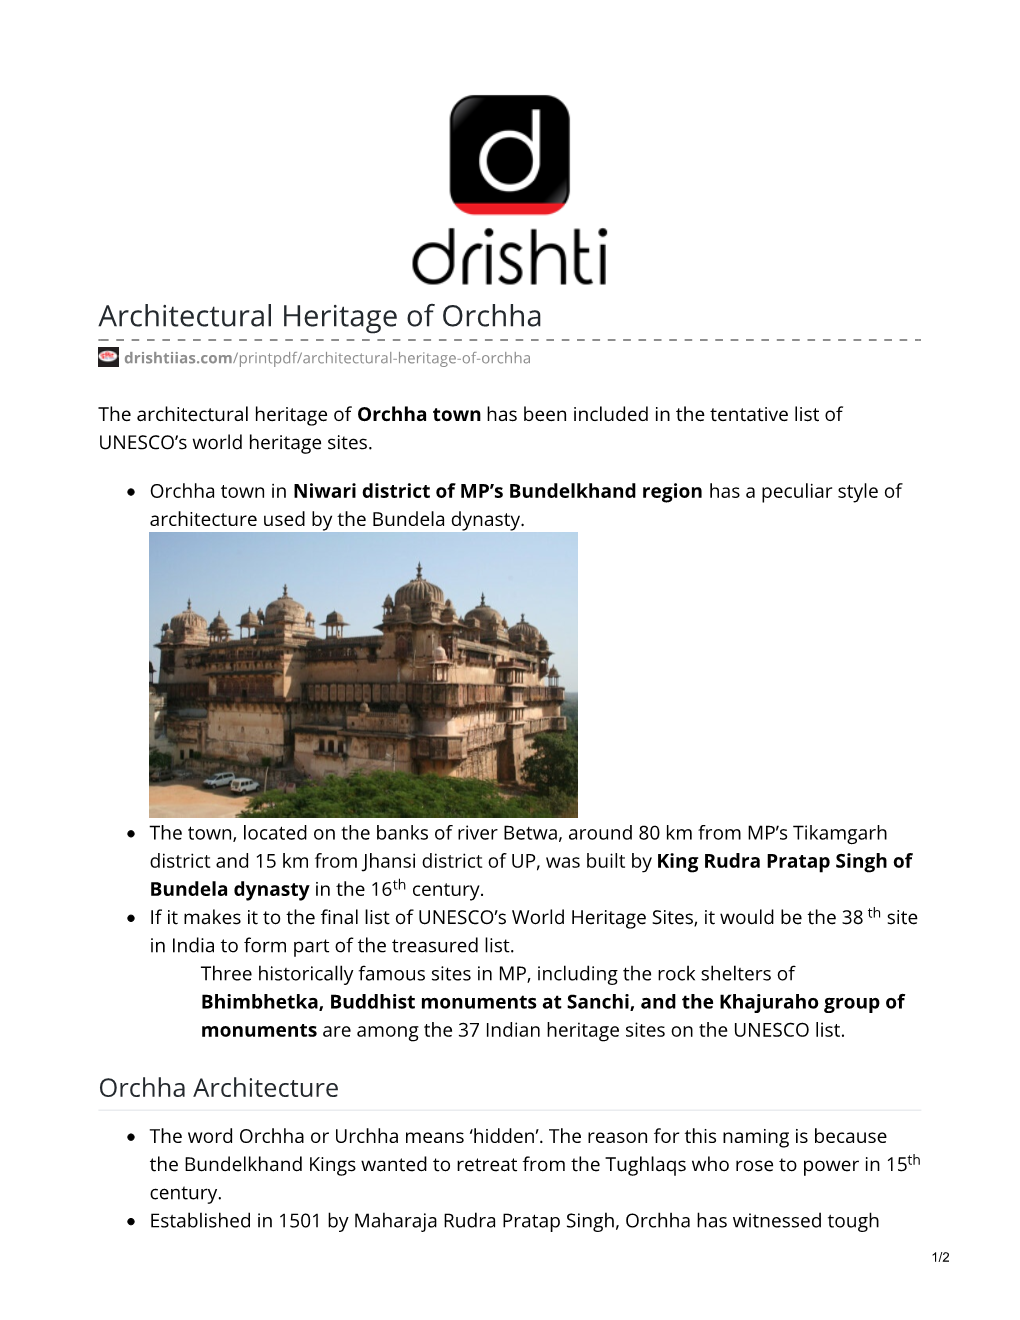 Architectural Heritage of Orchha